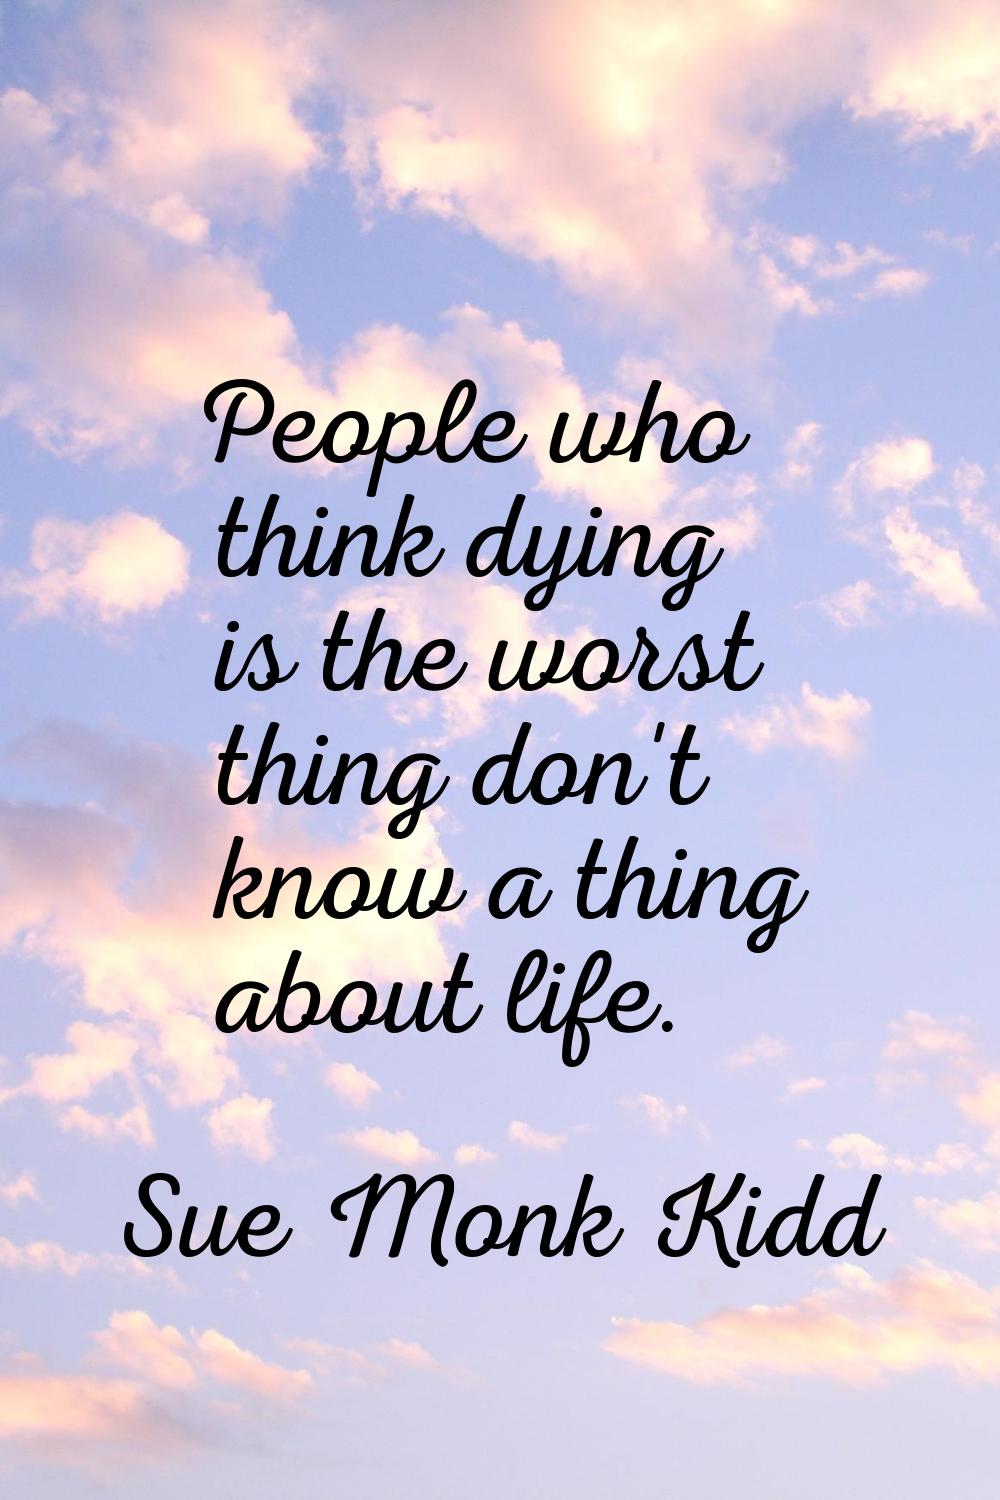 People who think dying is the worst thing don't know a thing about life.